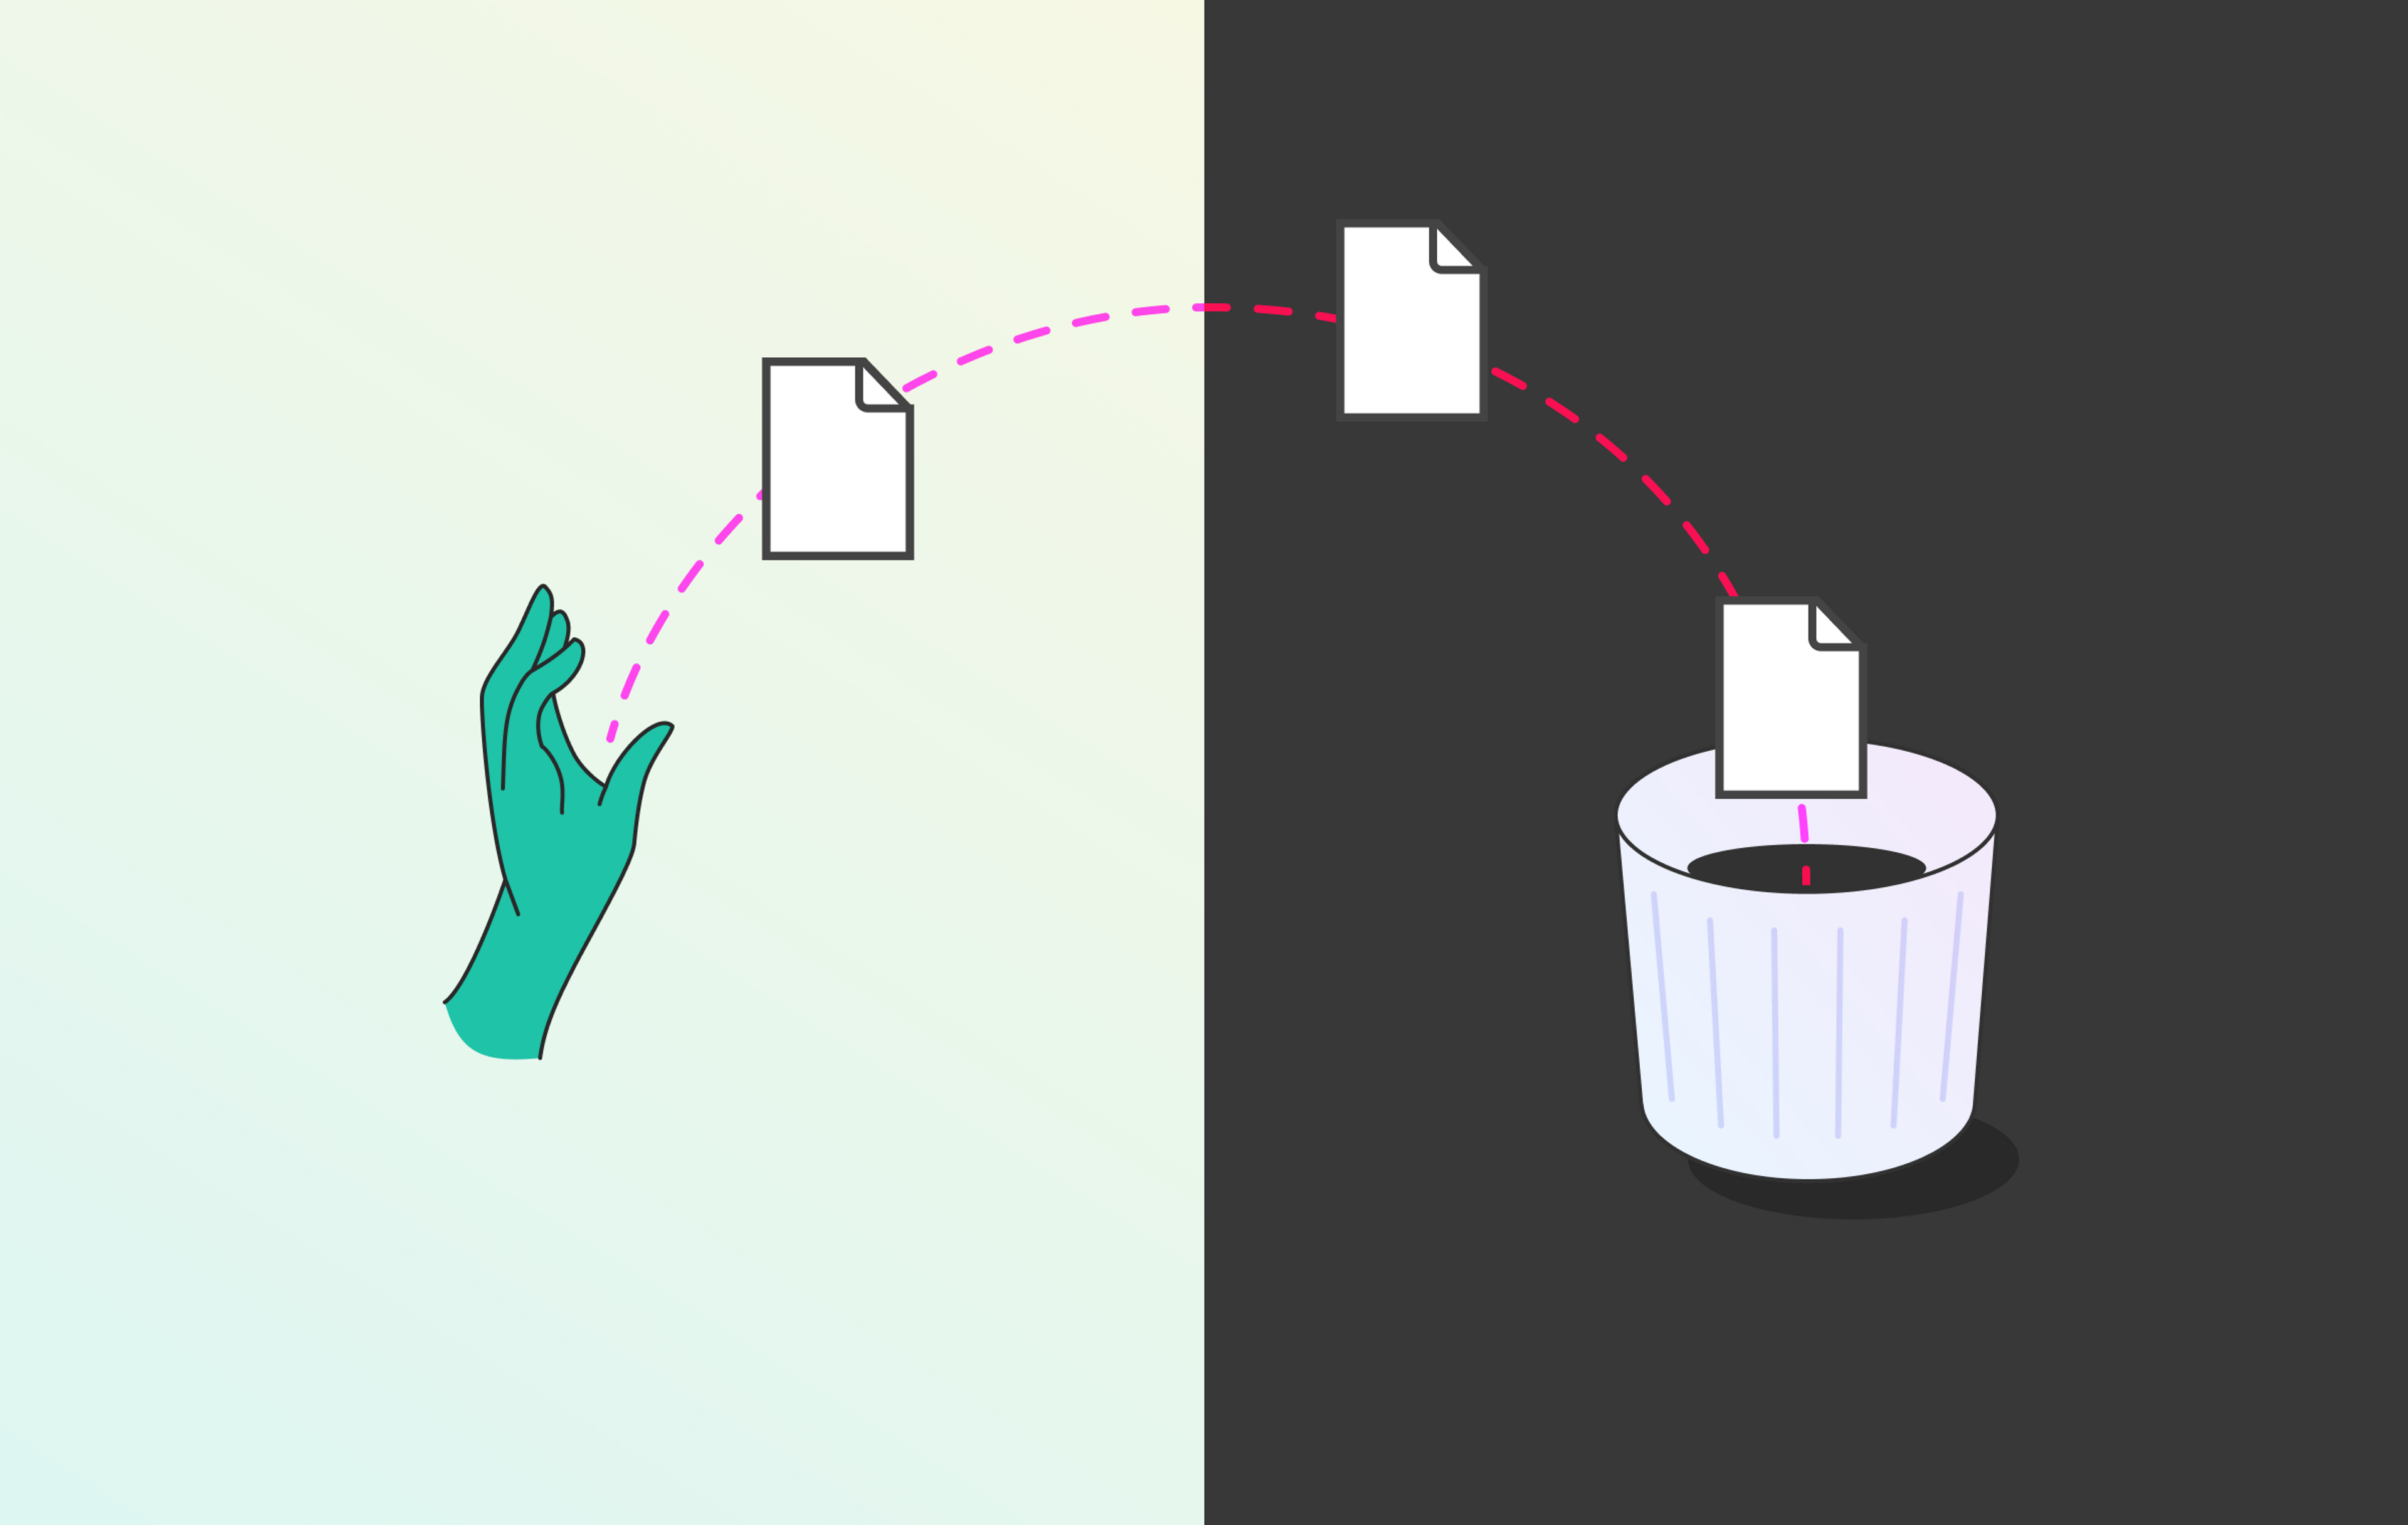 An illustration depicting a human hand tossing a file into a trash bin